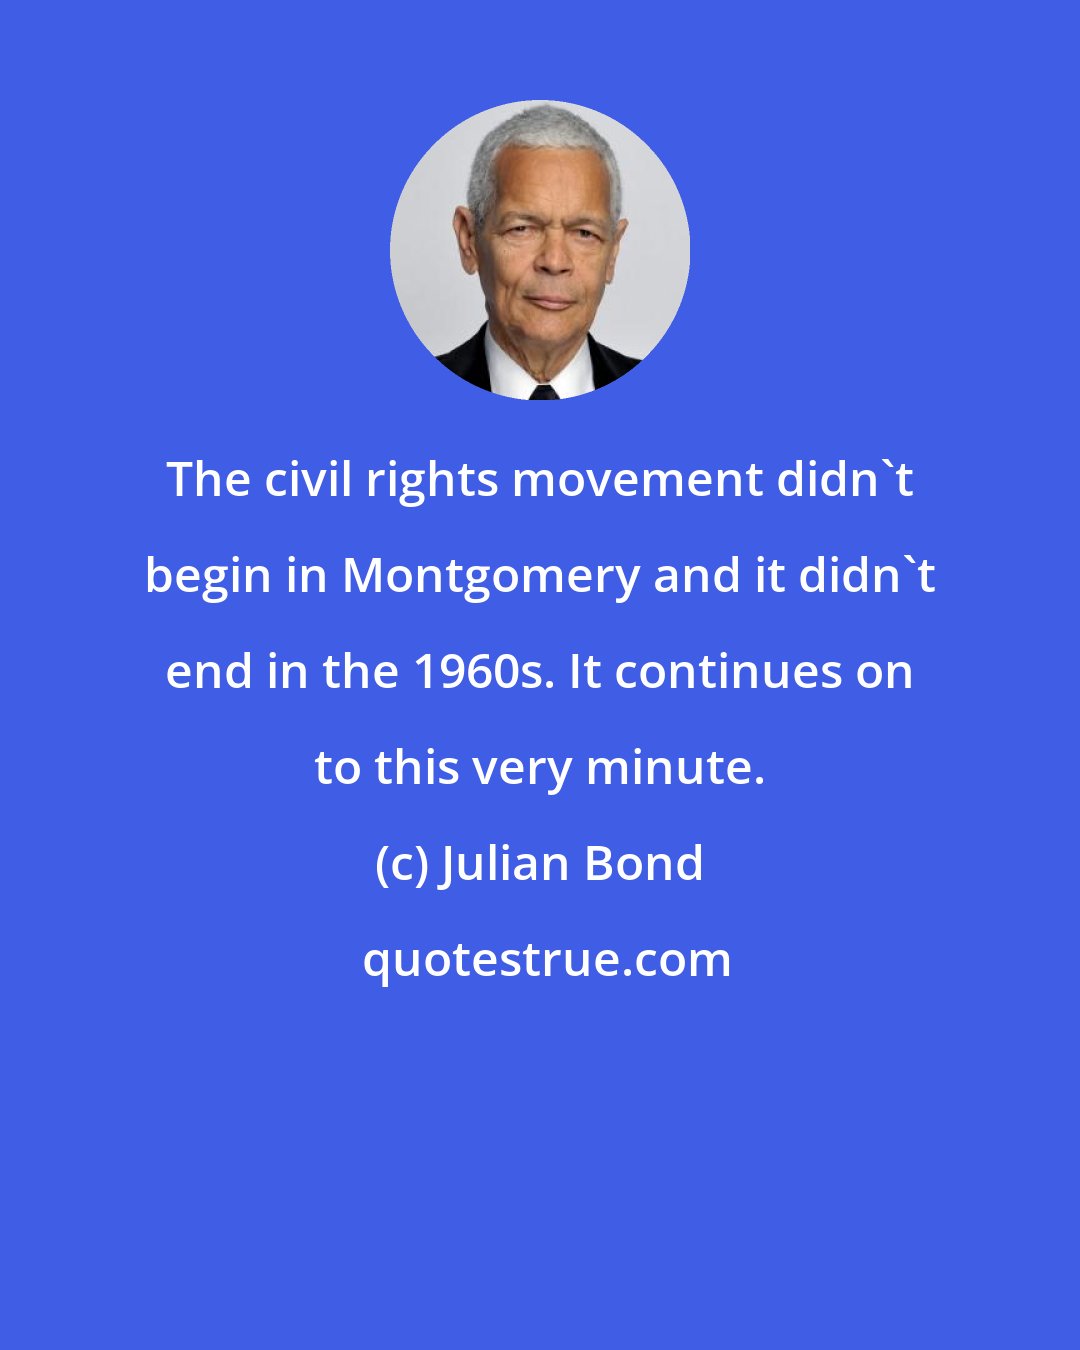 Julian Bond: The civil rights movement didn't begin in Montgomery and it didn't end in the 1960s. It continues on to this very minute.